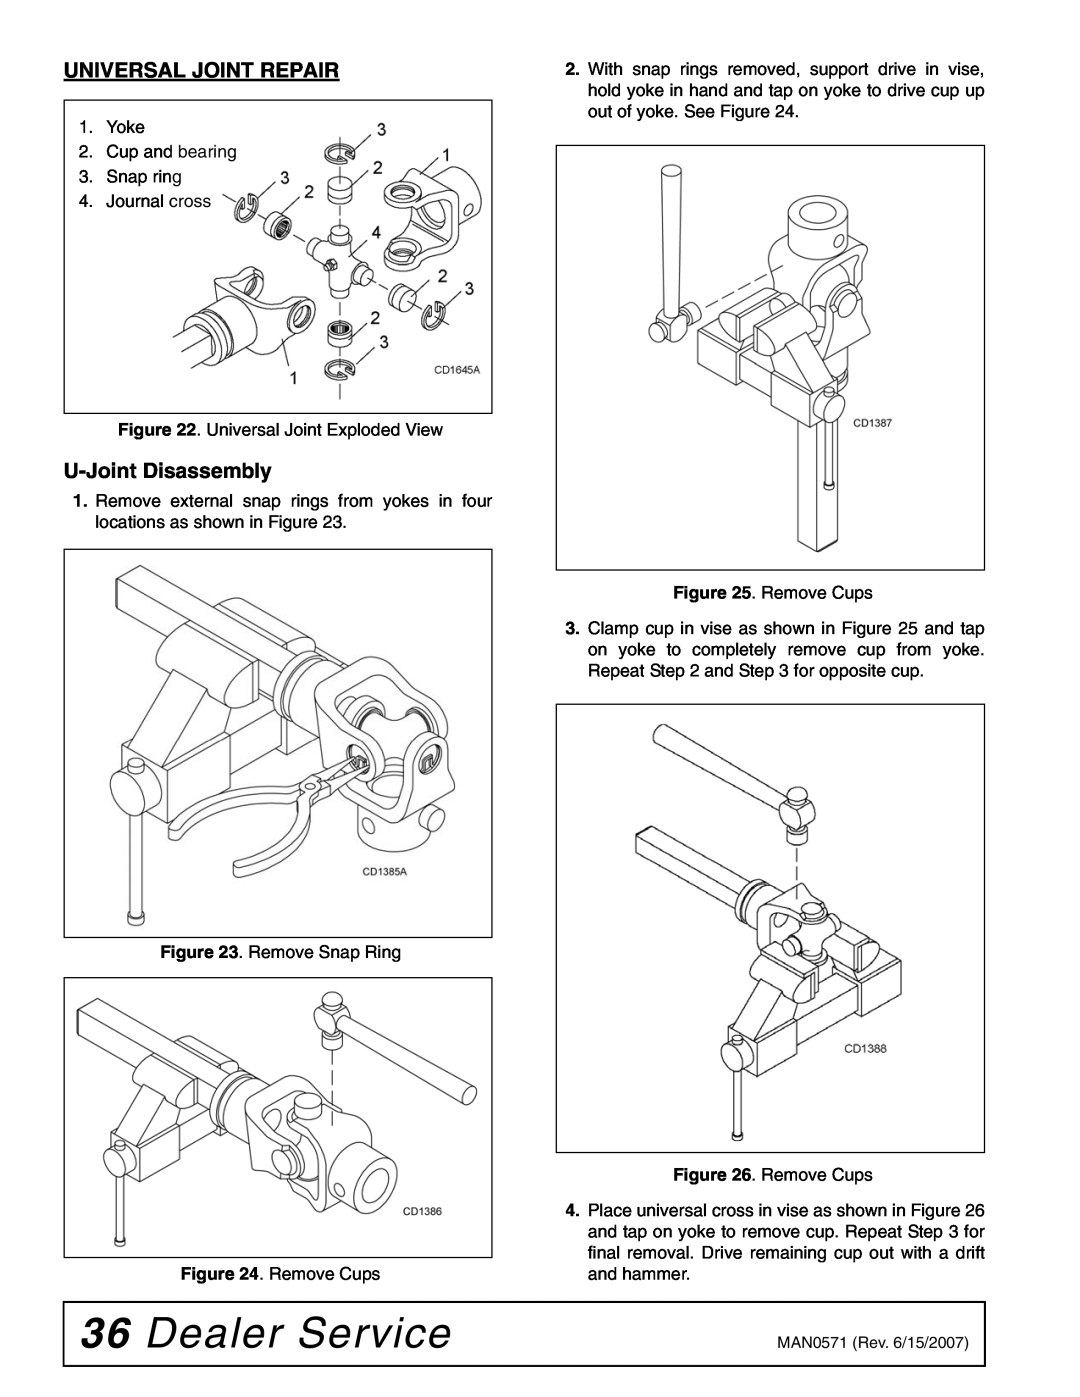 Woods Equipment DSO1260Q, DS1440Q, DS1260Q manual Dealer Service, Universal Joint Repair, U-Joint Disassembly 